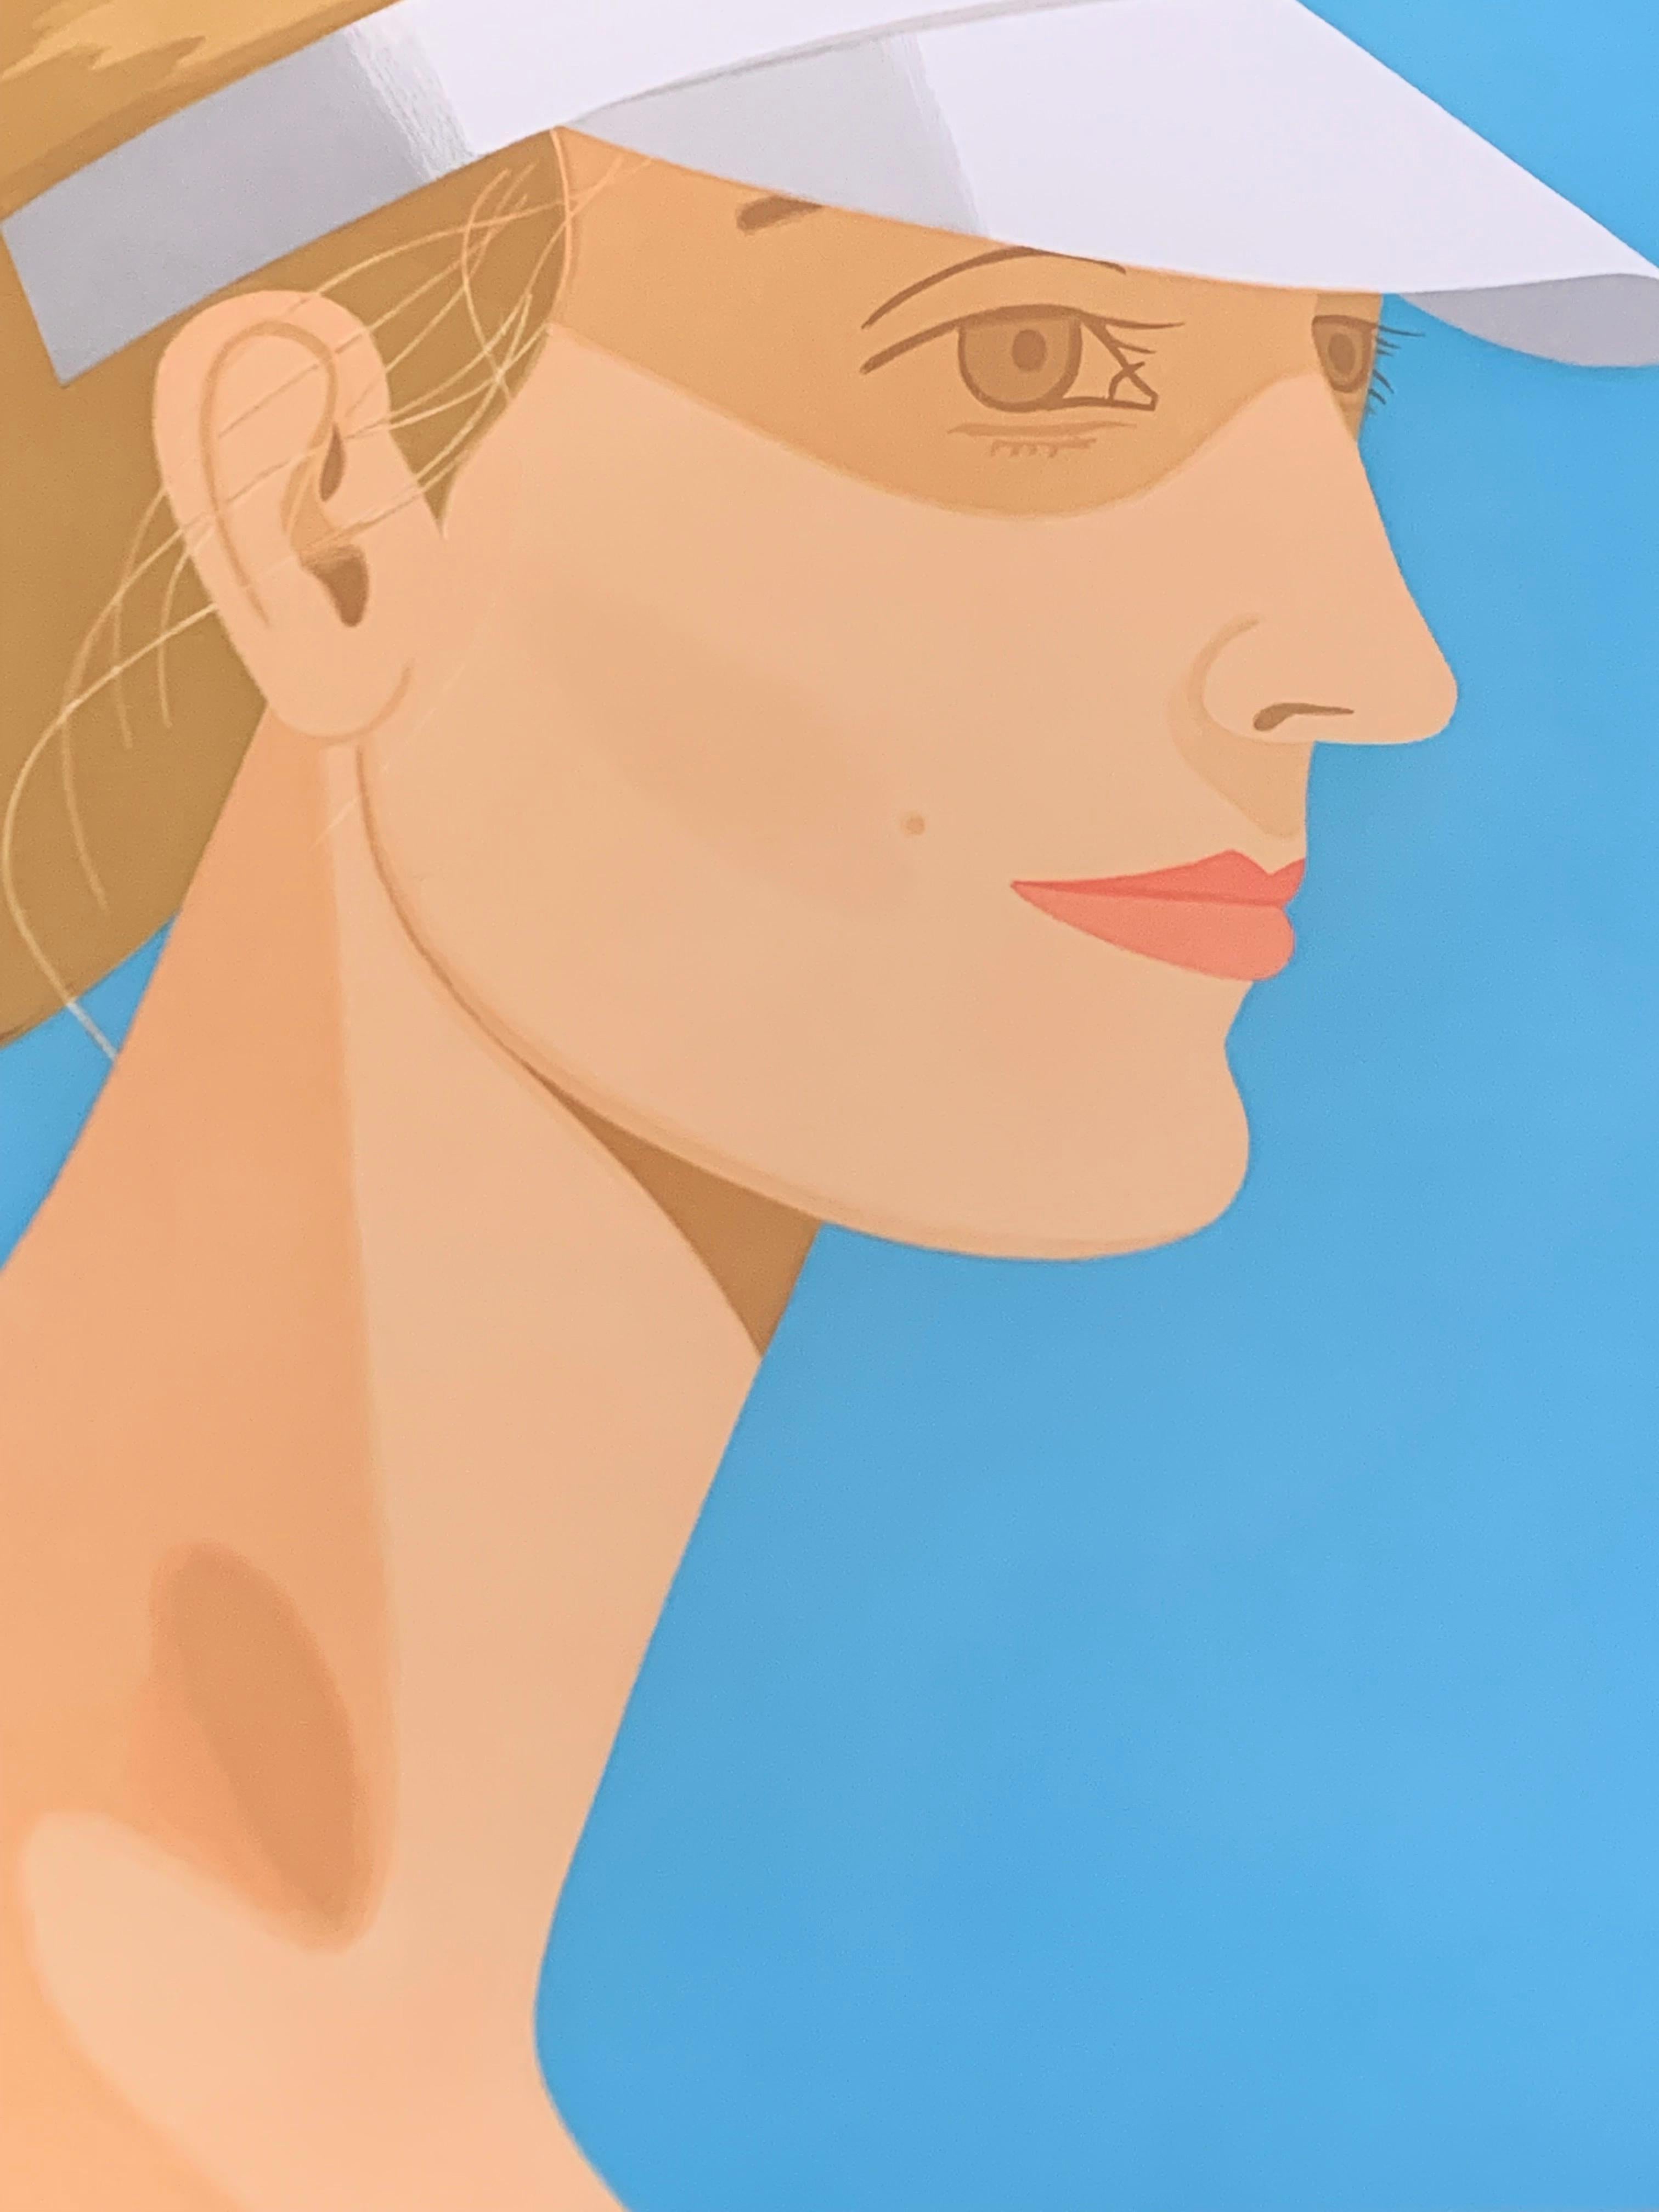 Alex Katz was born in Brooklyn, New York in 1927. In 1928, at the outset of the Depression, his family moved to St. Albans, a diverse suburb of Queens that had sprung up between the two wars. Katz was raised in St. Albans by his Russian parents. His